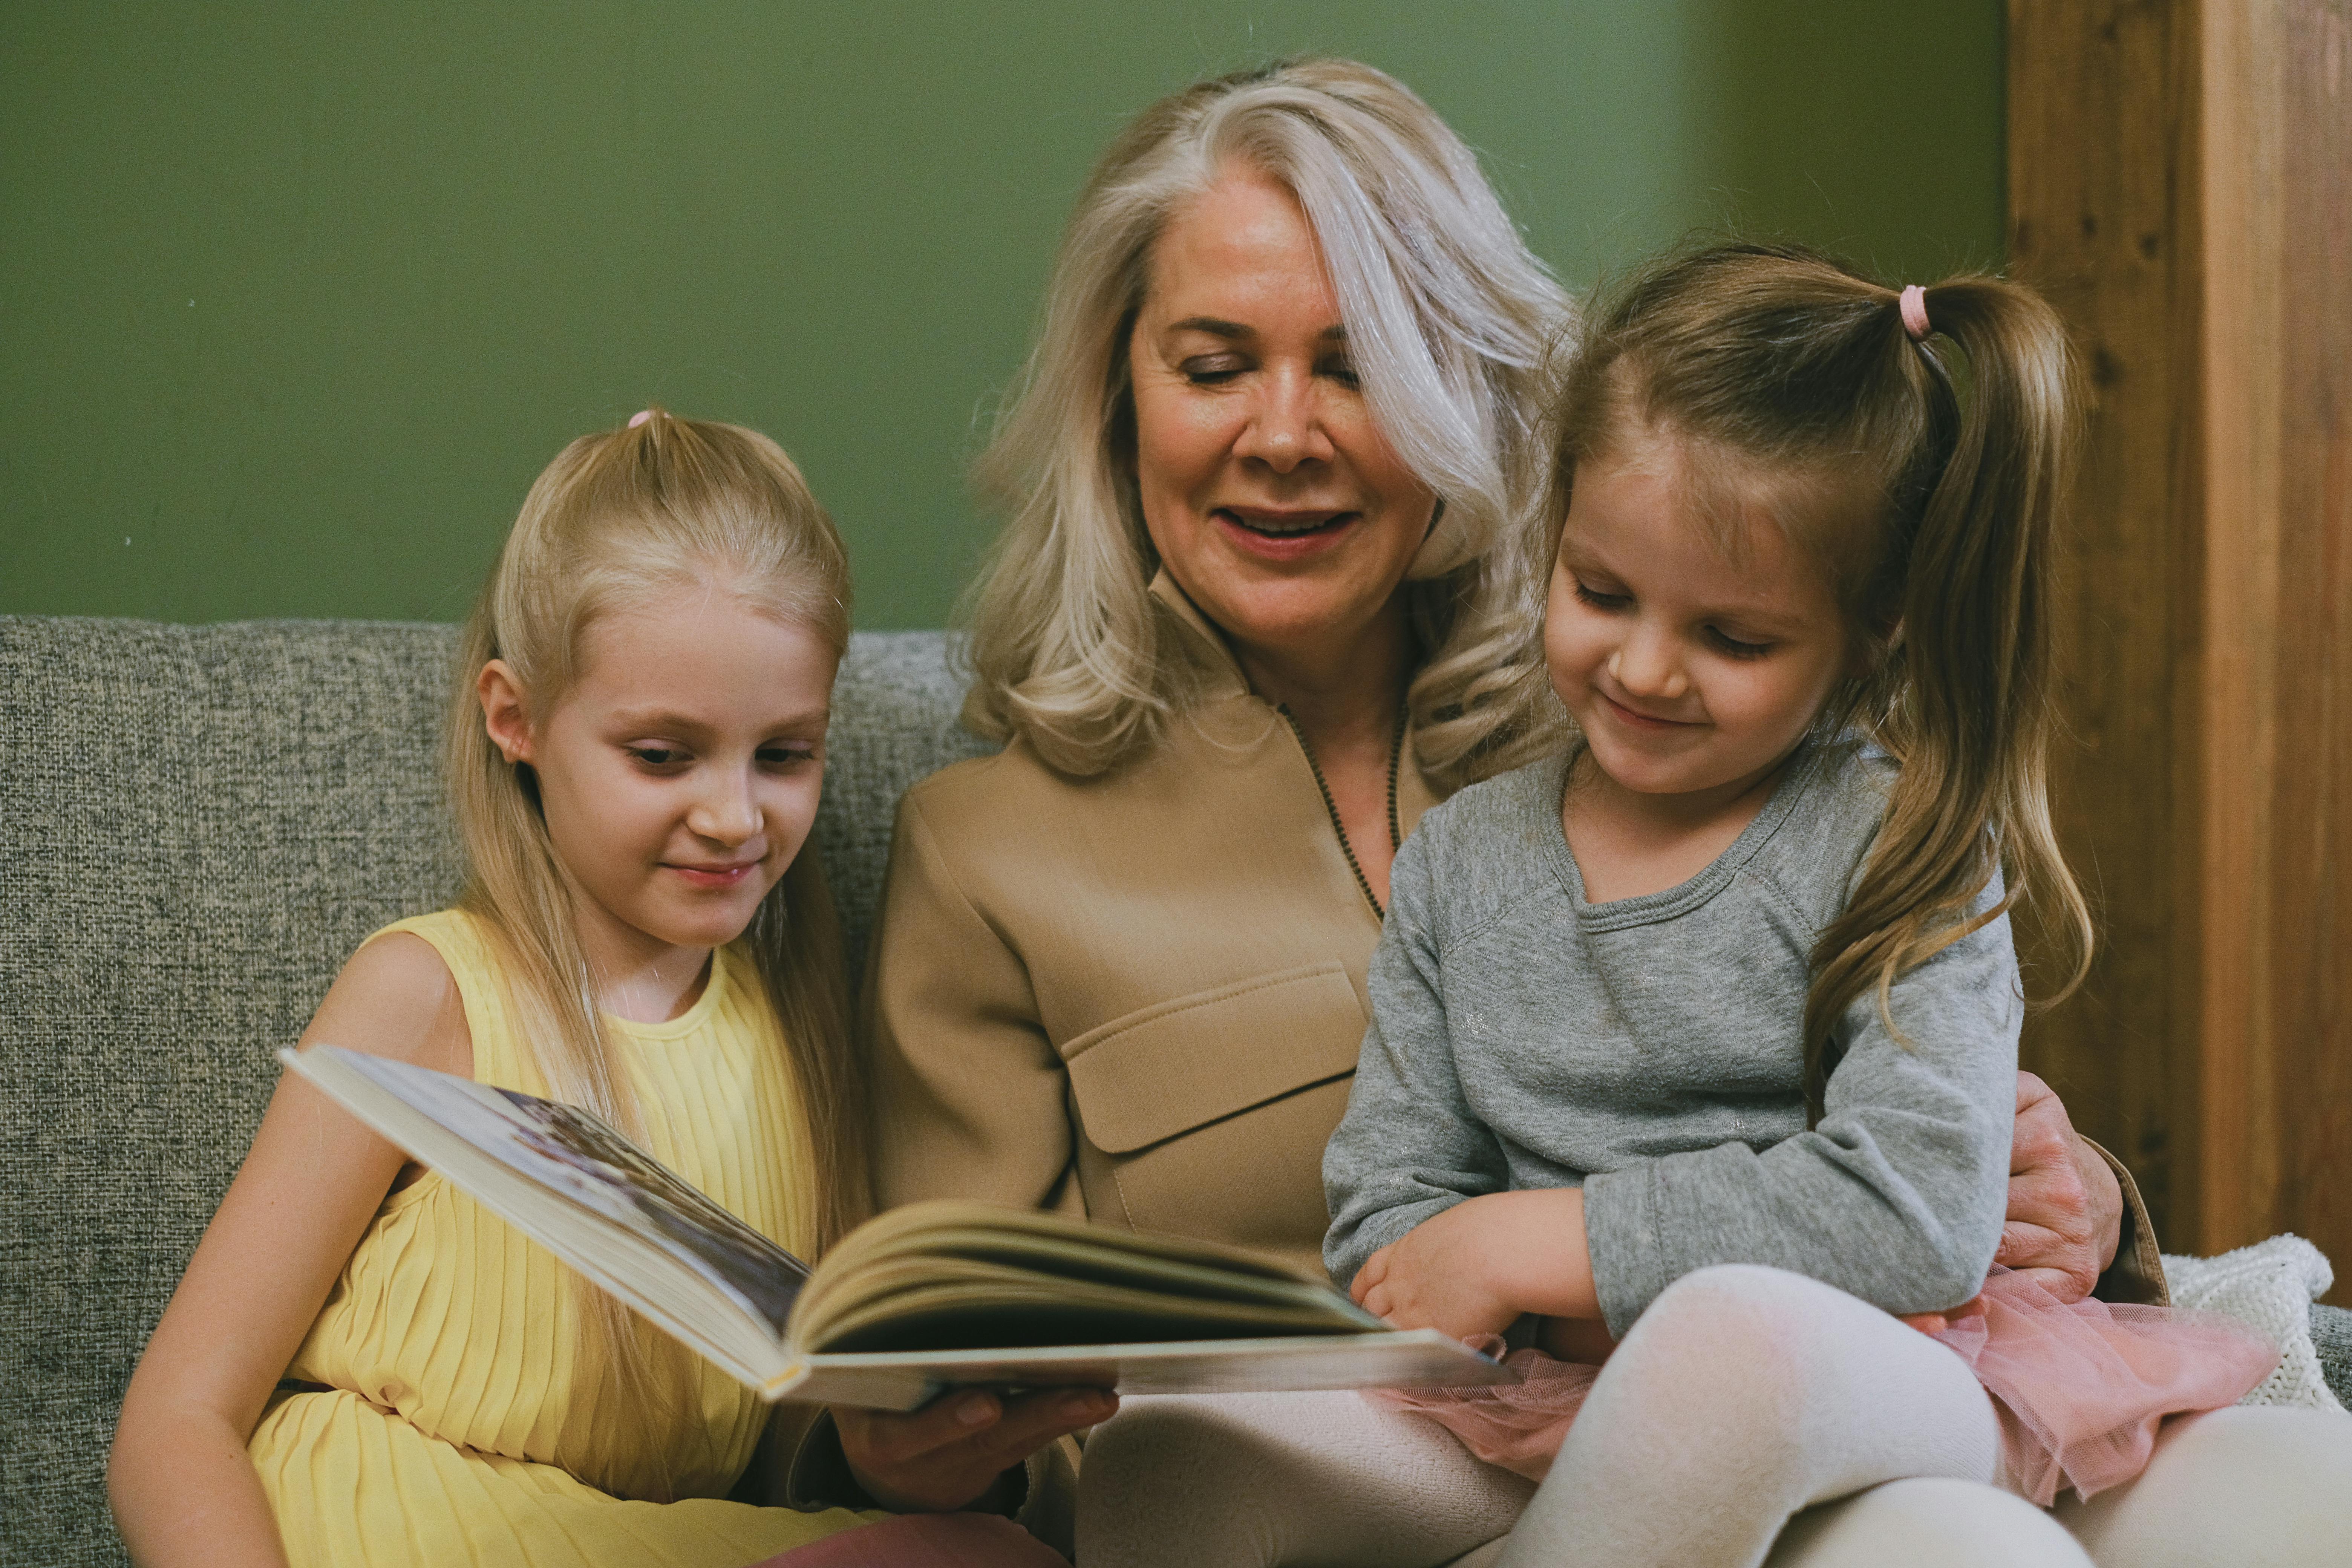 A woman reading a story to her grandchildren | Source: Pexels